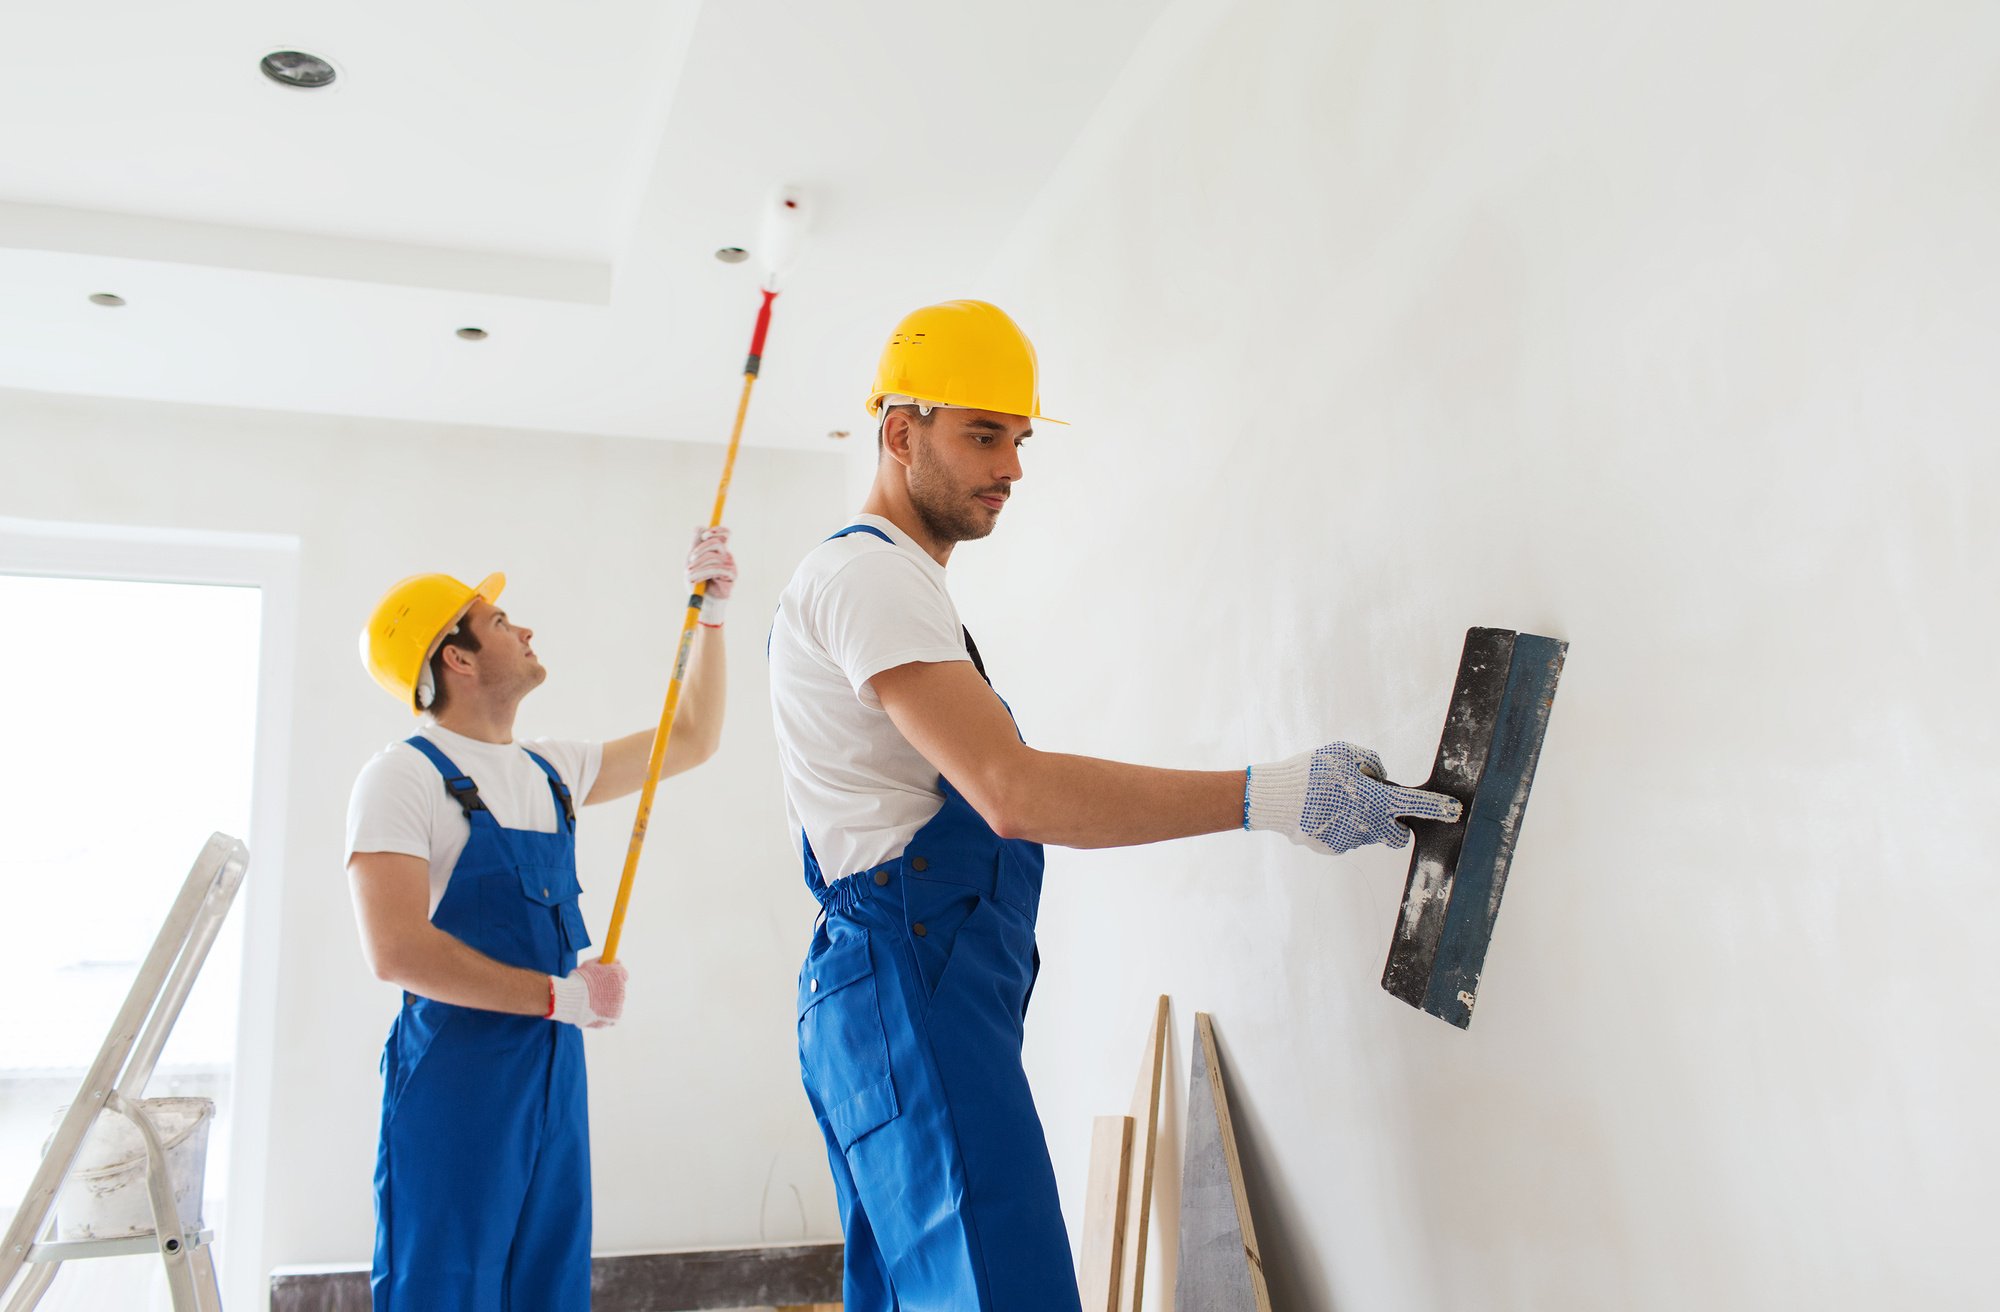 When hiring commercial painters, it is important to look for a company that has experience and a good reputation. Learn more here.